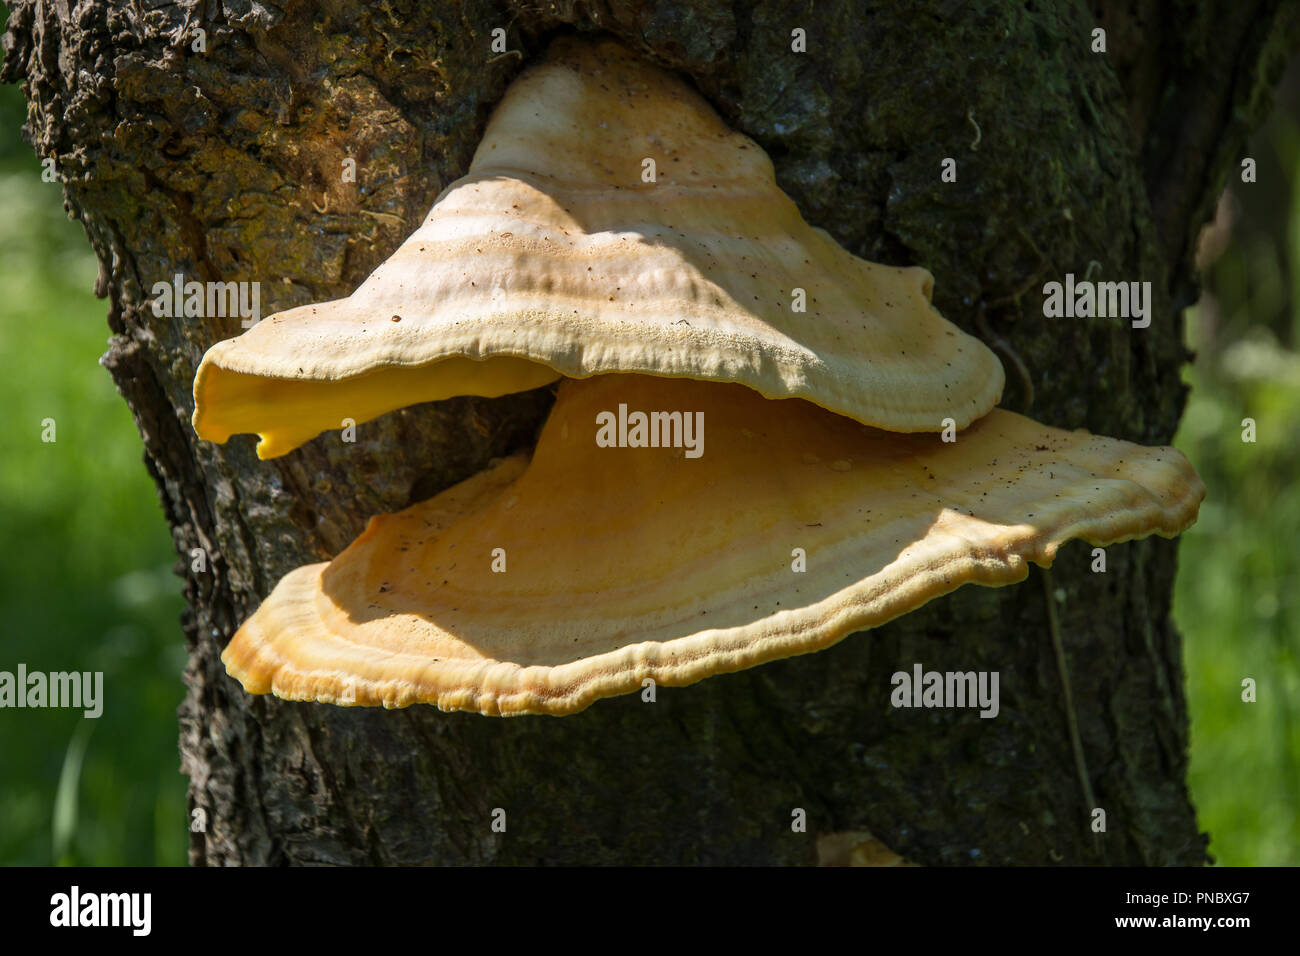 Polypores, or bracket fungi growing on an orchard tree, sometimes edible. Stock Photo